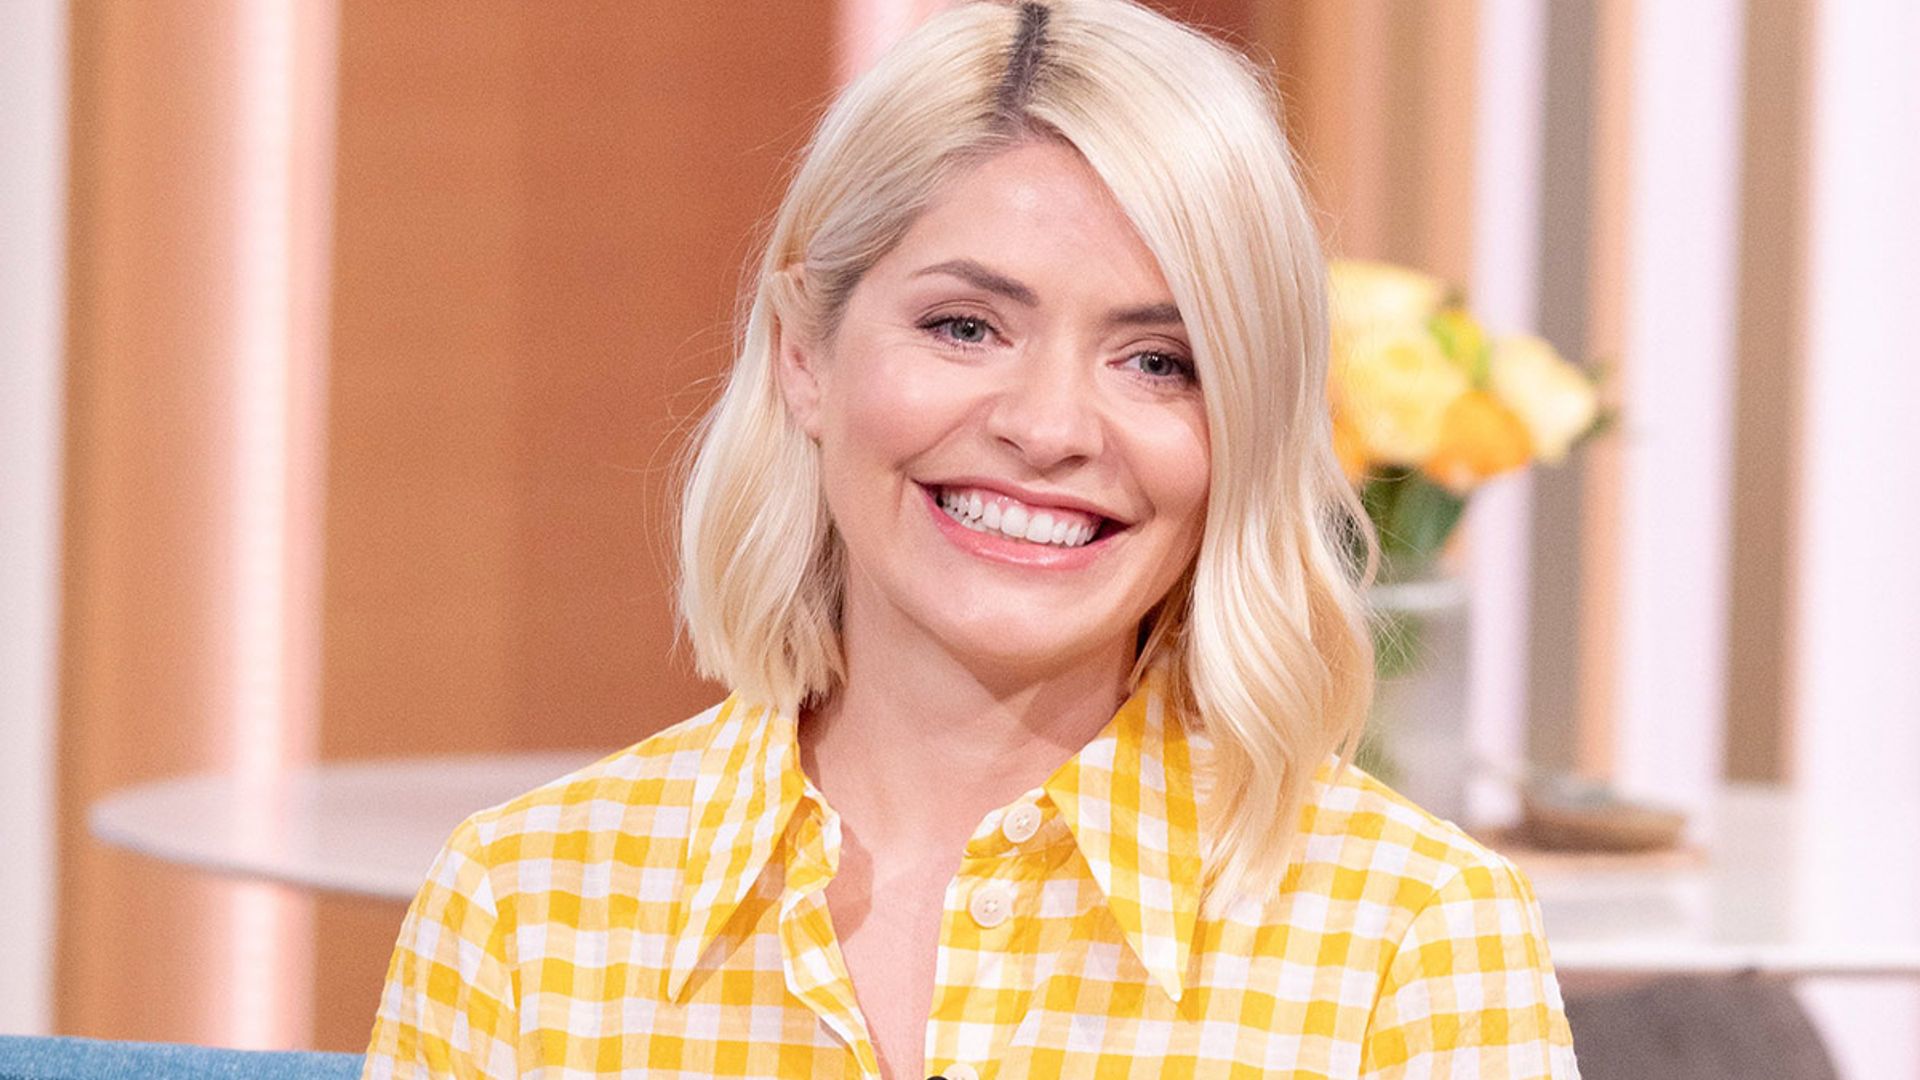 This Morning S Holly Willoughby Gives Sweet Shout Out To Son Harry For